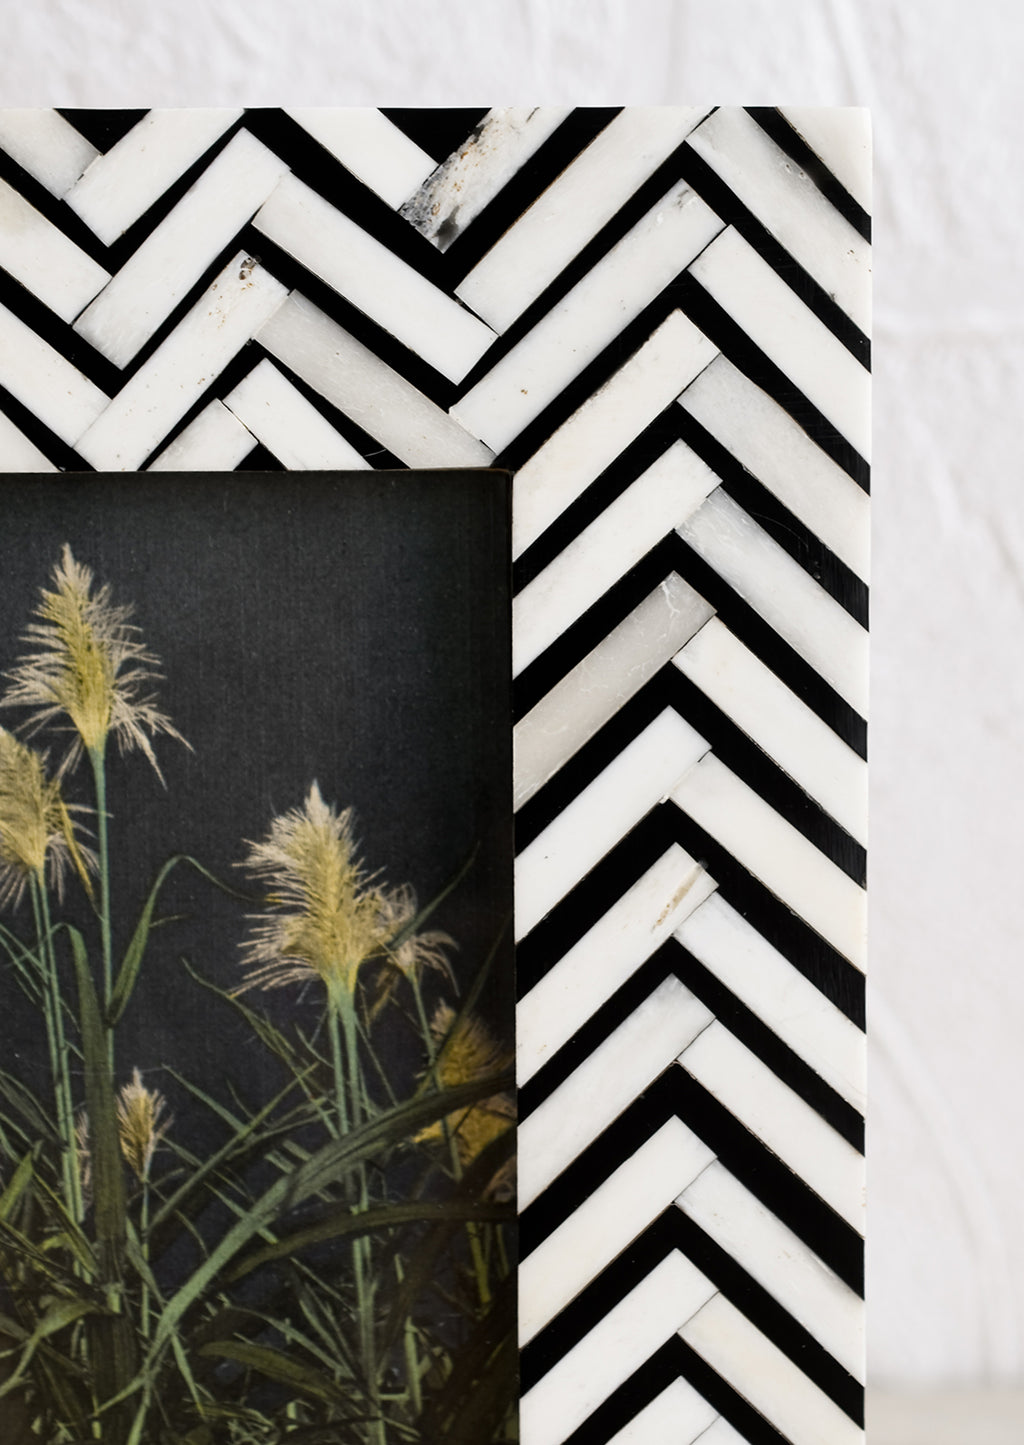 2: A bone picture frame with black and white chevron pattern.